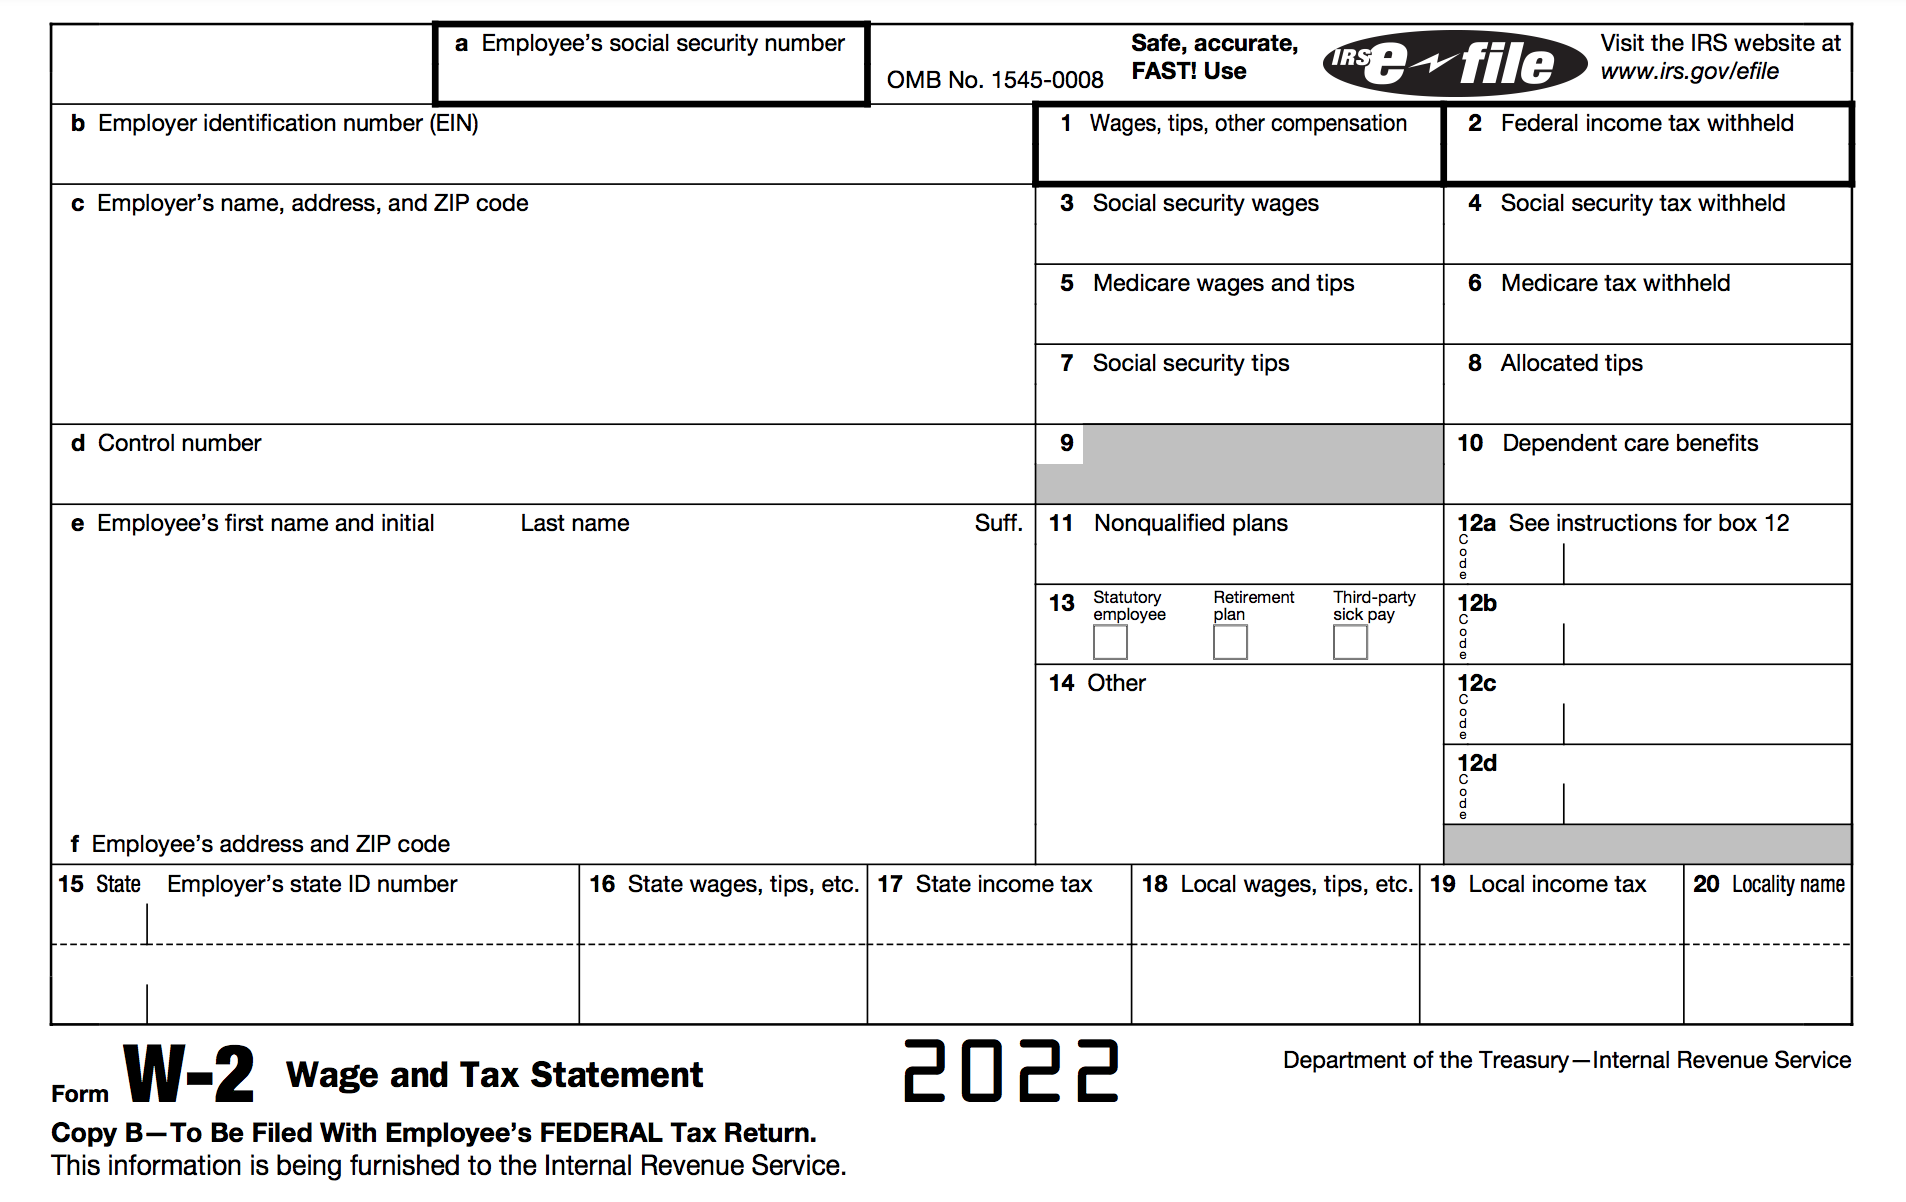 How To Fill Out A W-2 Tax Form | Smartasset for W2 Forms Near Me